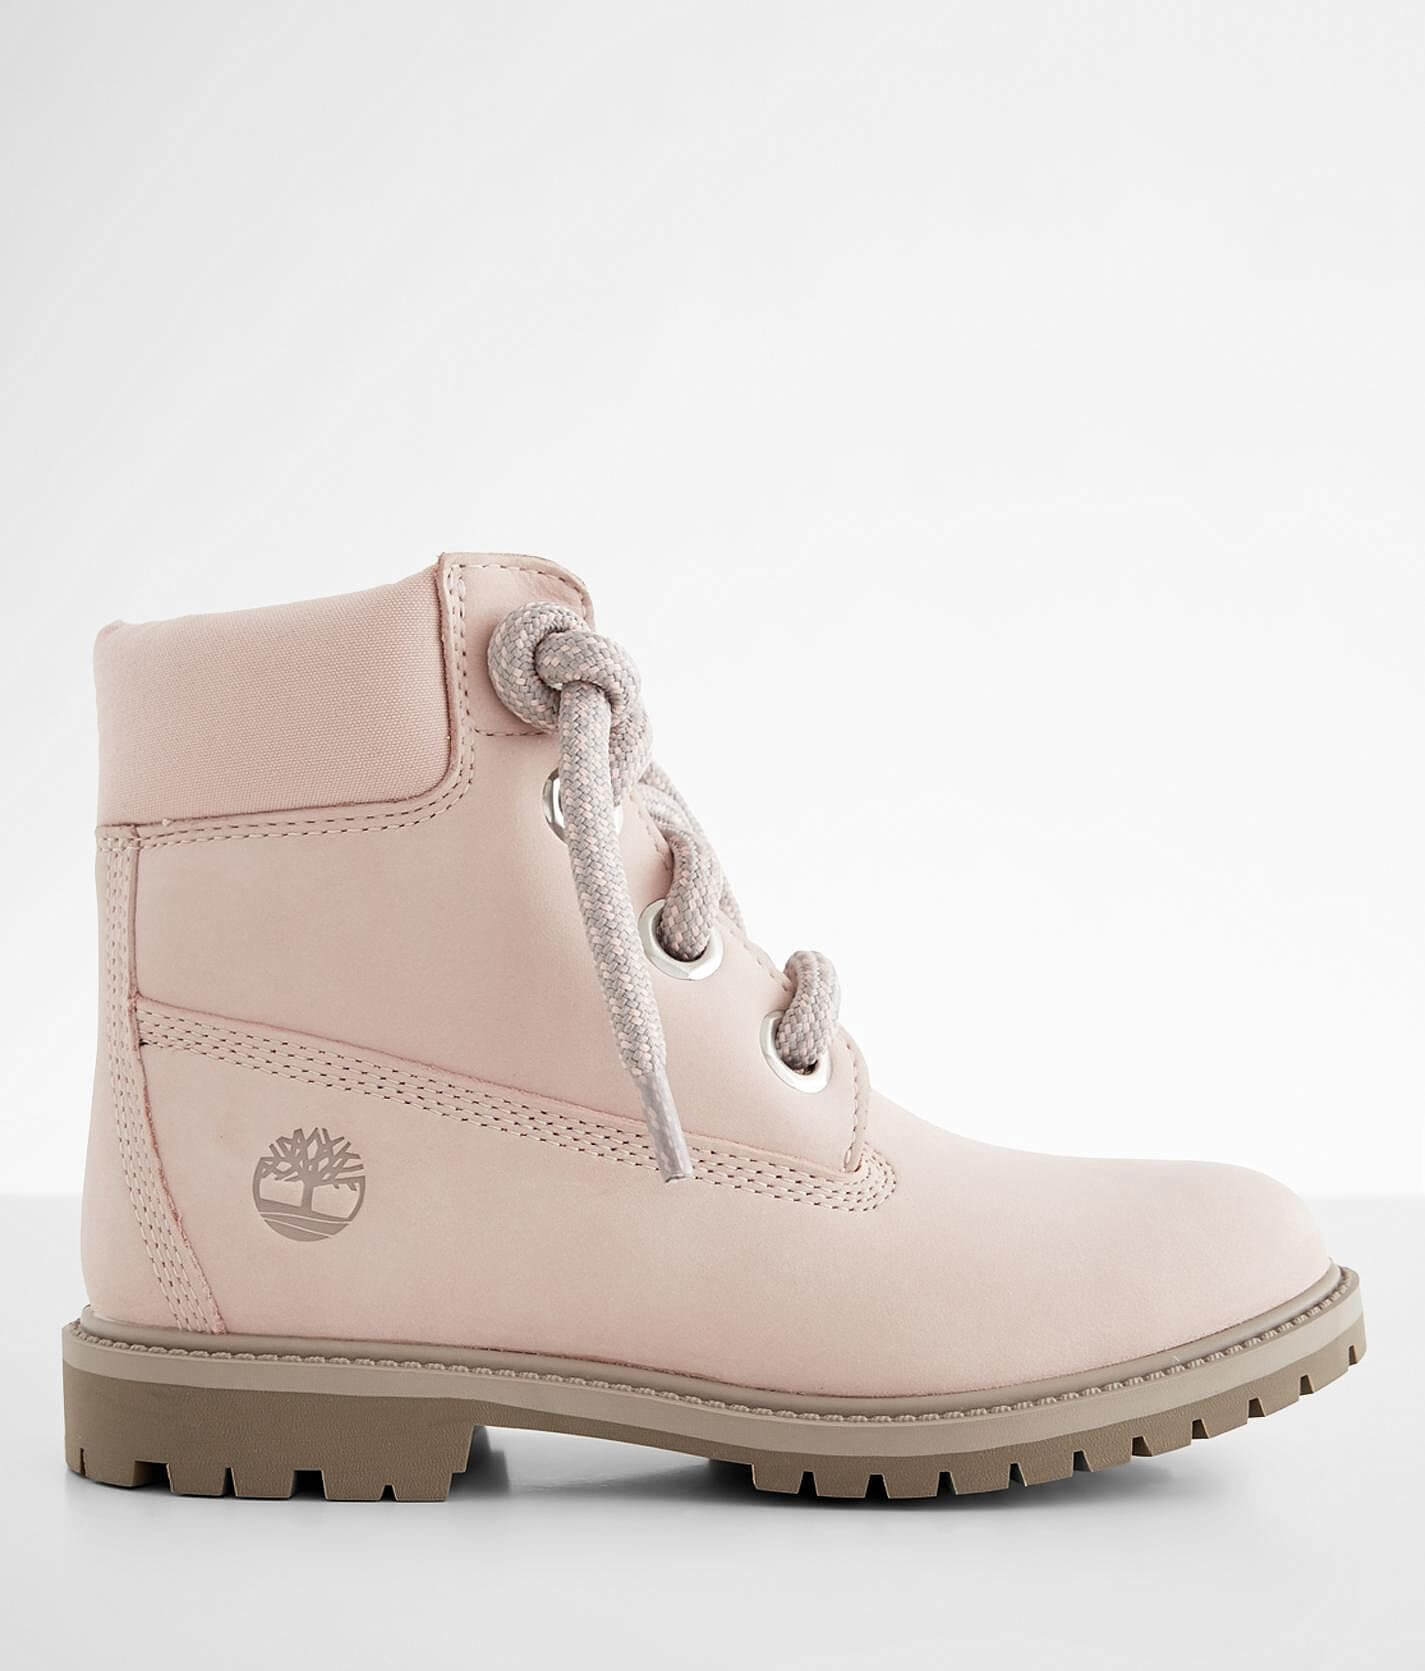 Heritage Leather Boot Women's in Light Pink Nubuck | Buckle